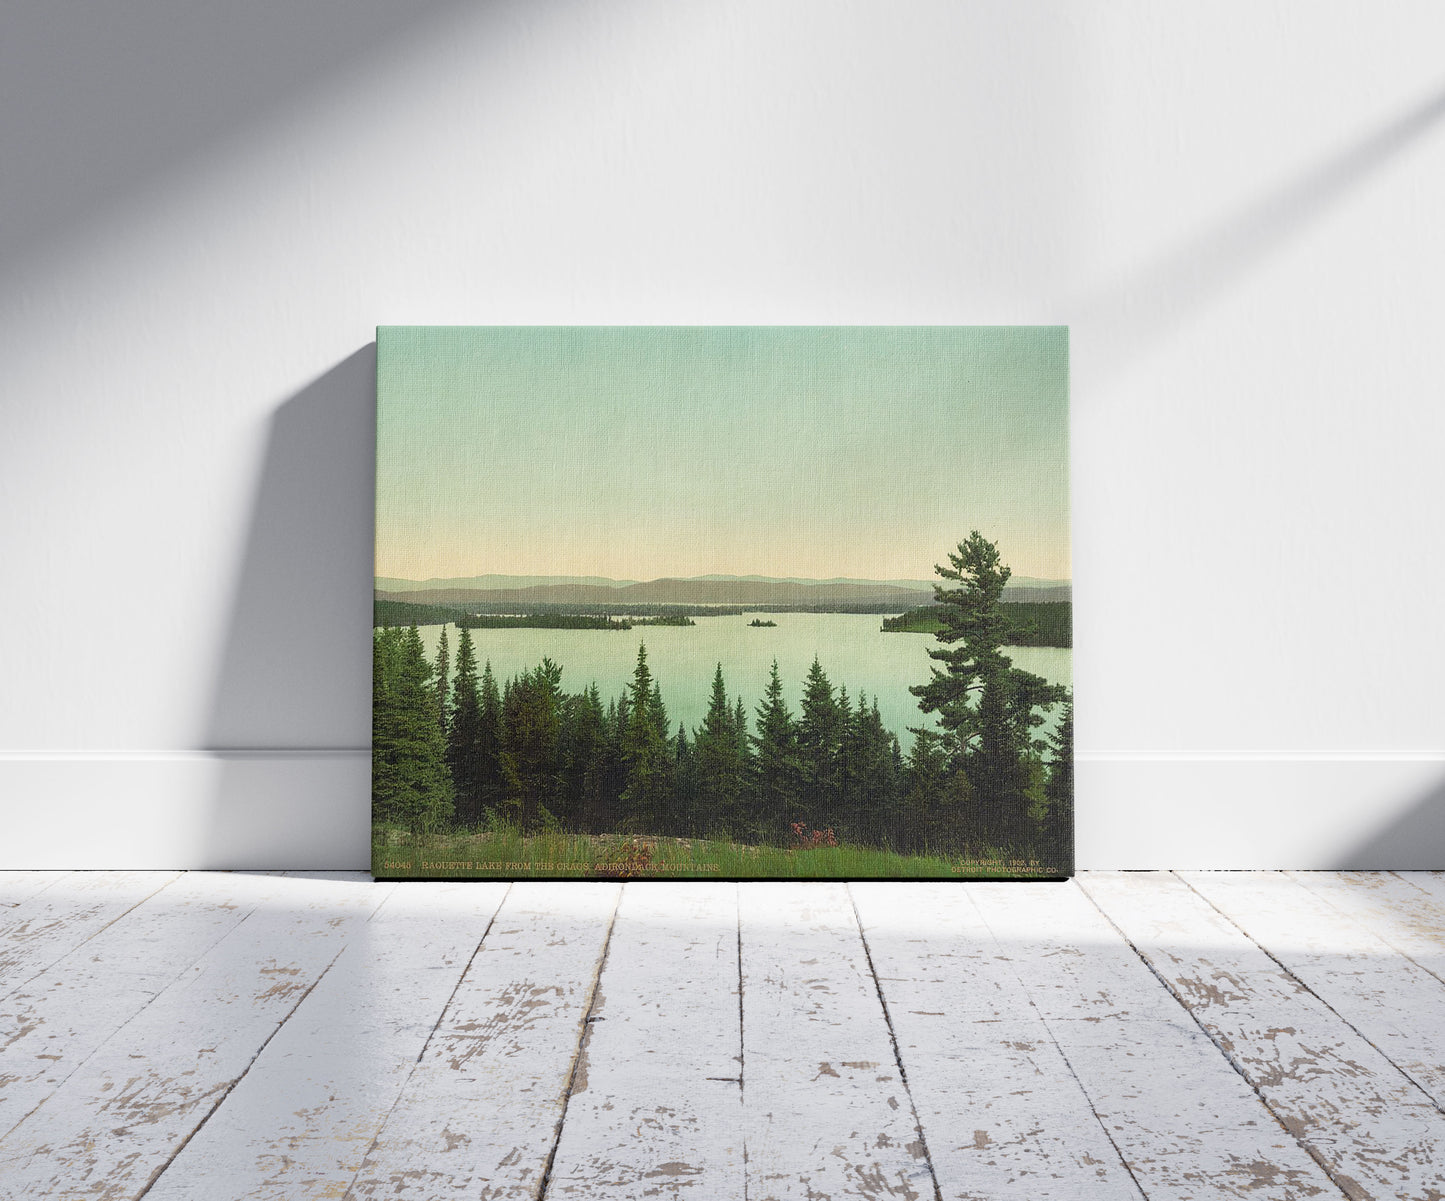 A picture of Raquette Lake from the Crags, Adirondack Mountains